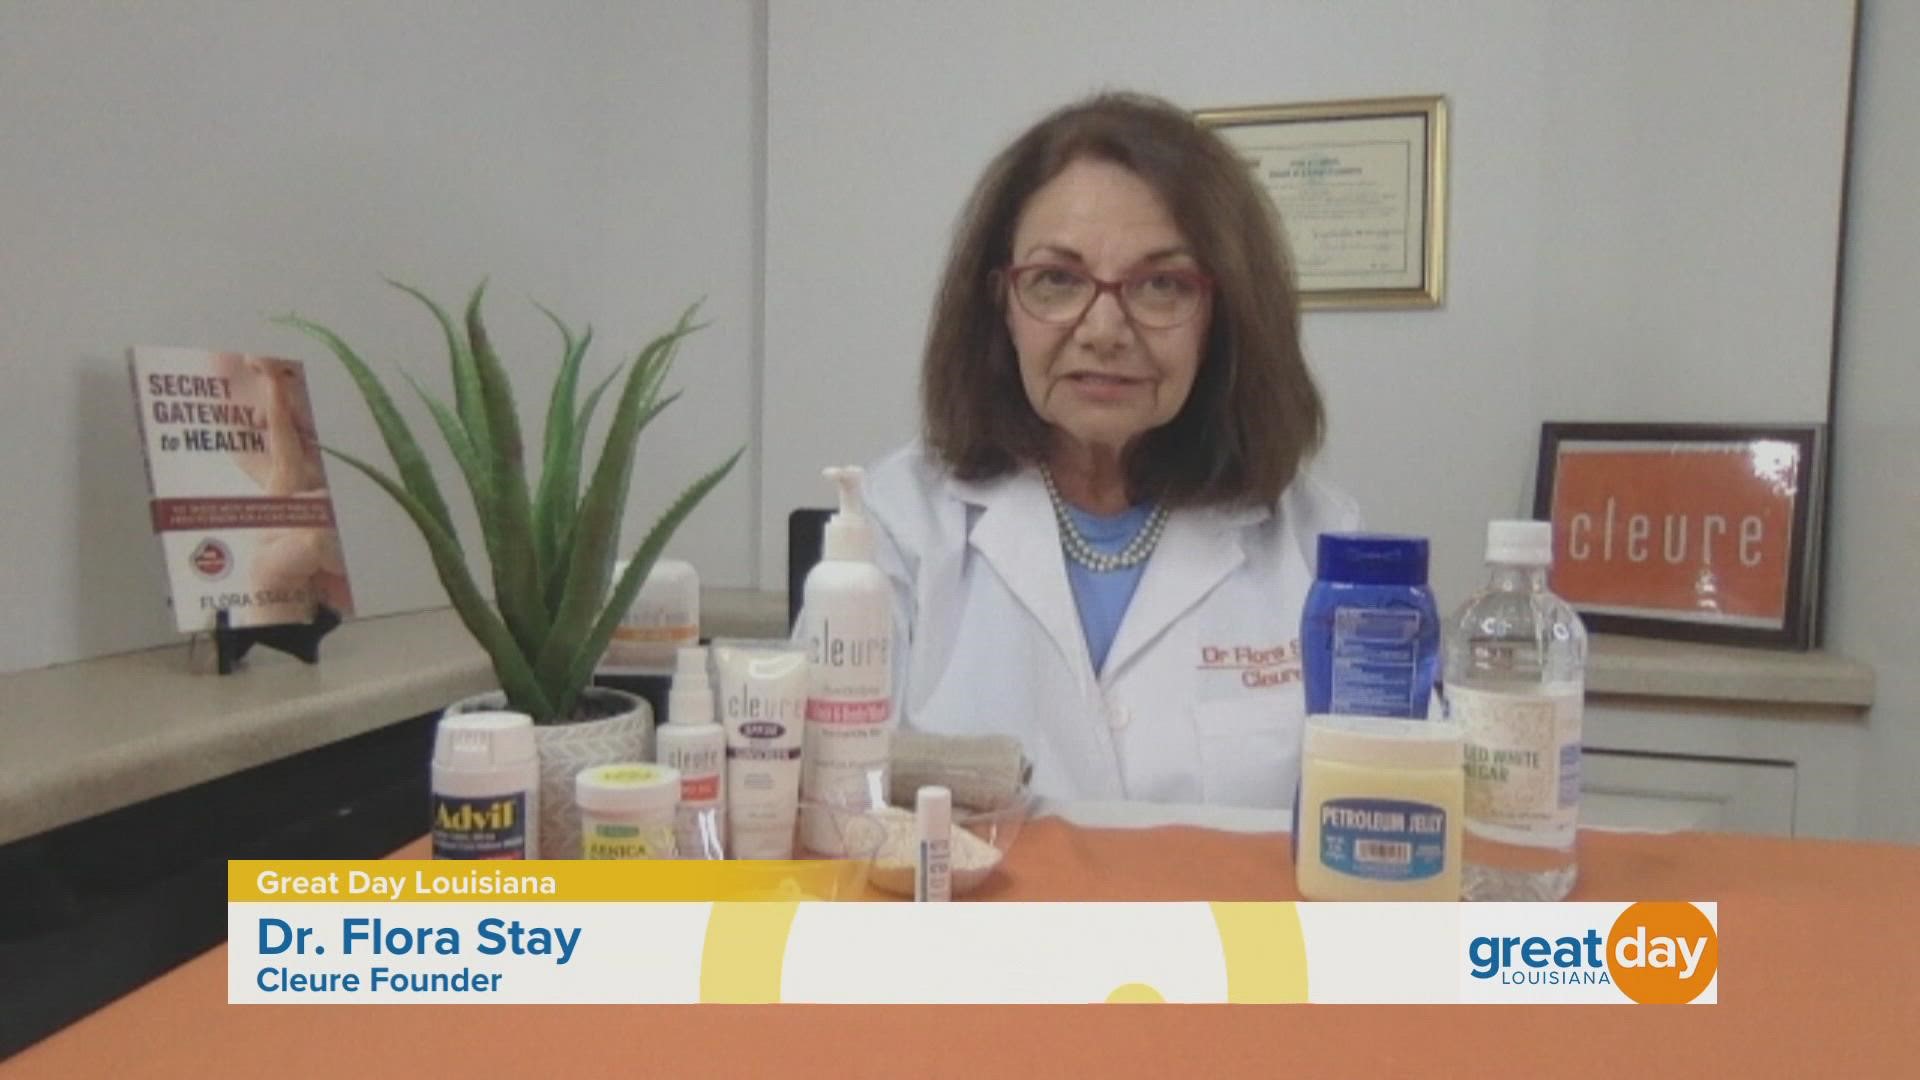 Dr. Flora Stay recommends products that can help treat your sunburns.